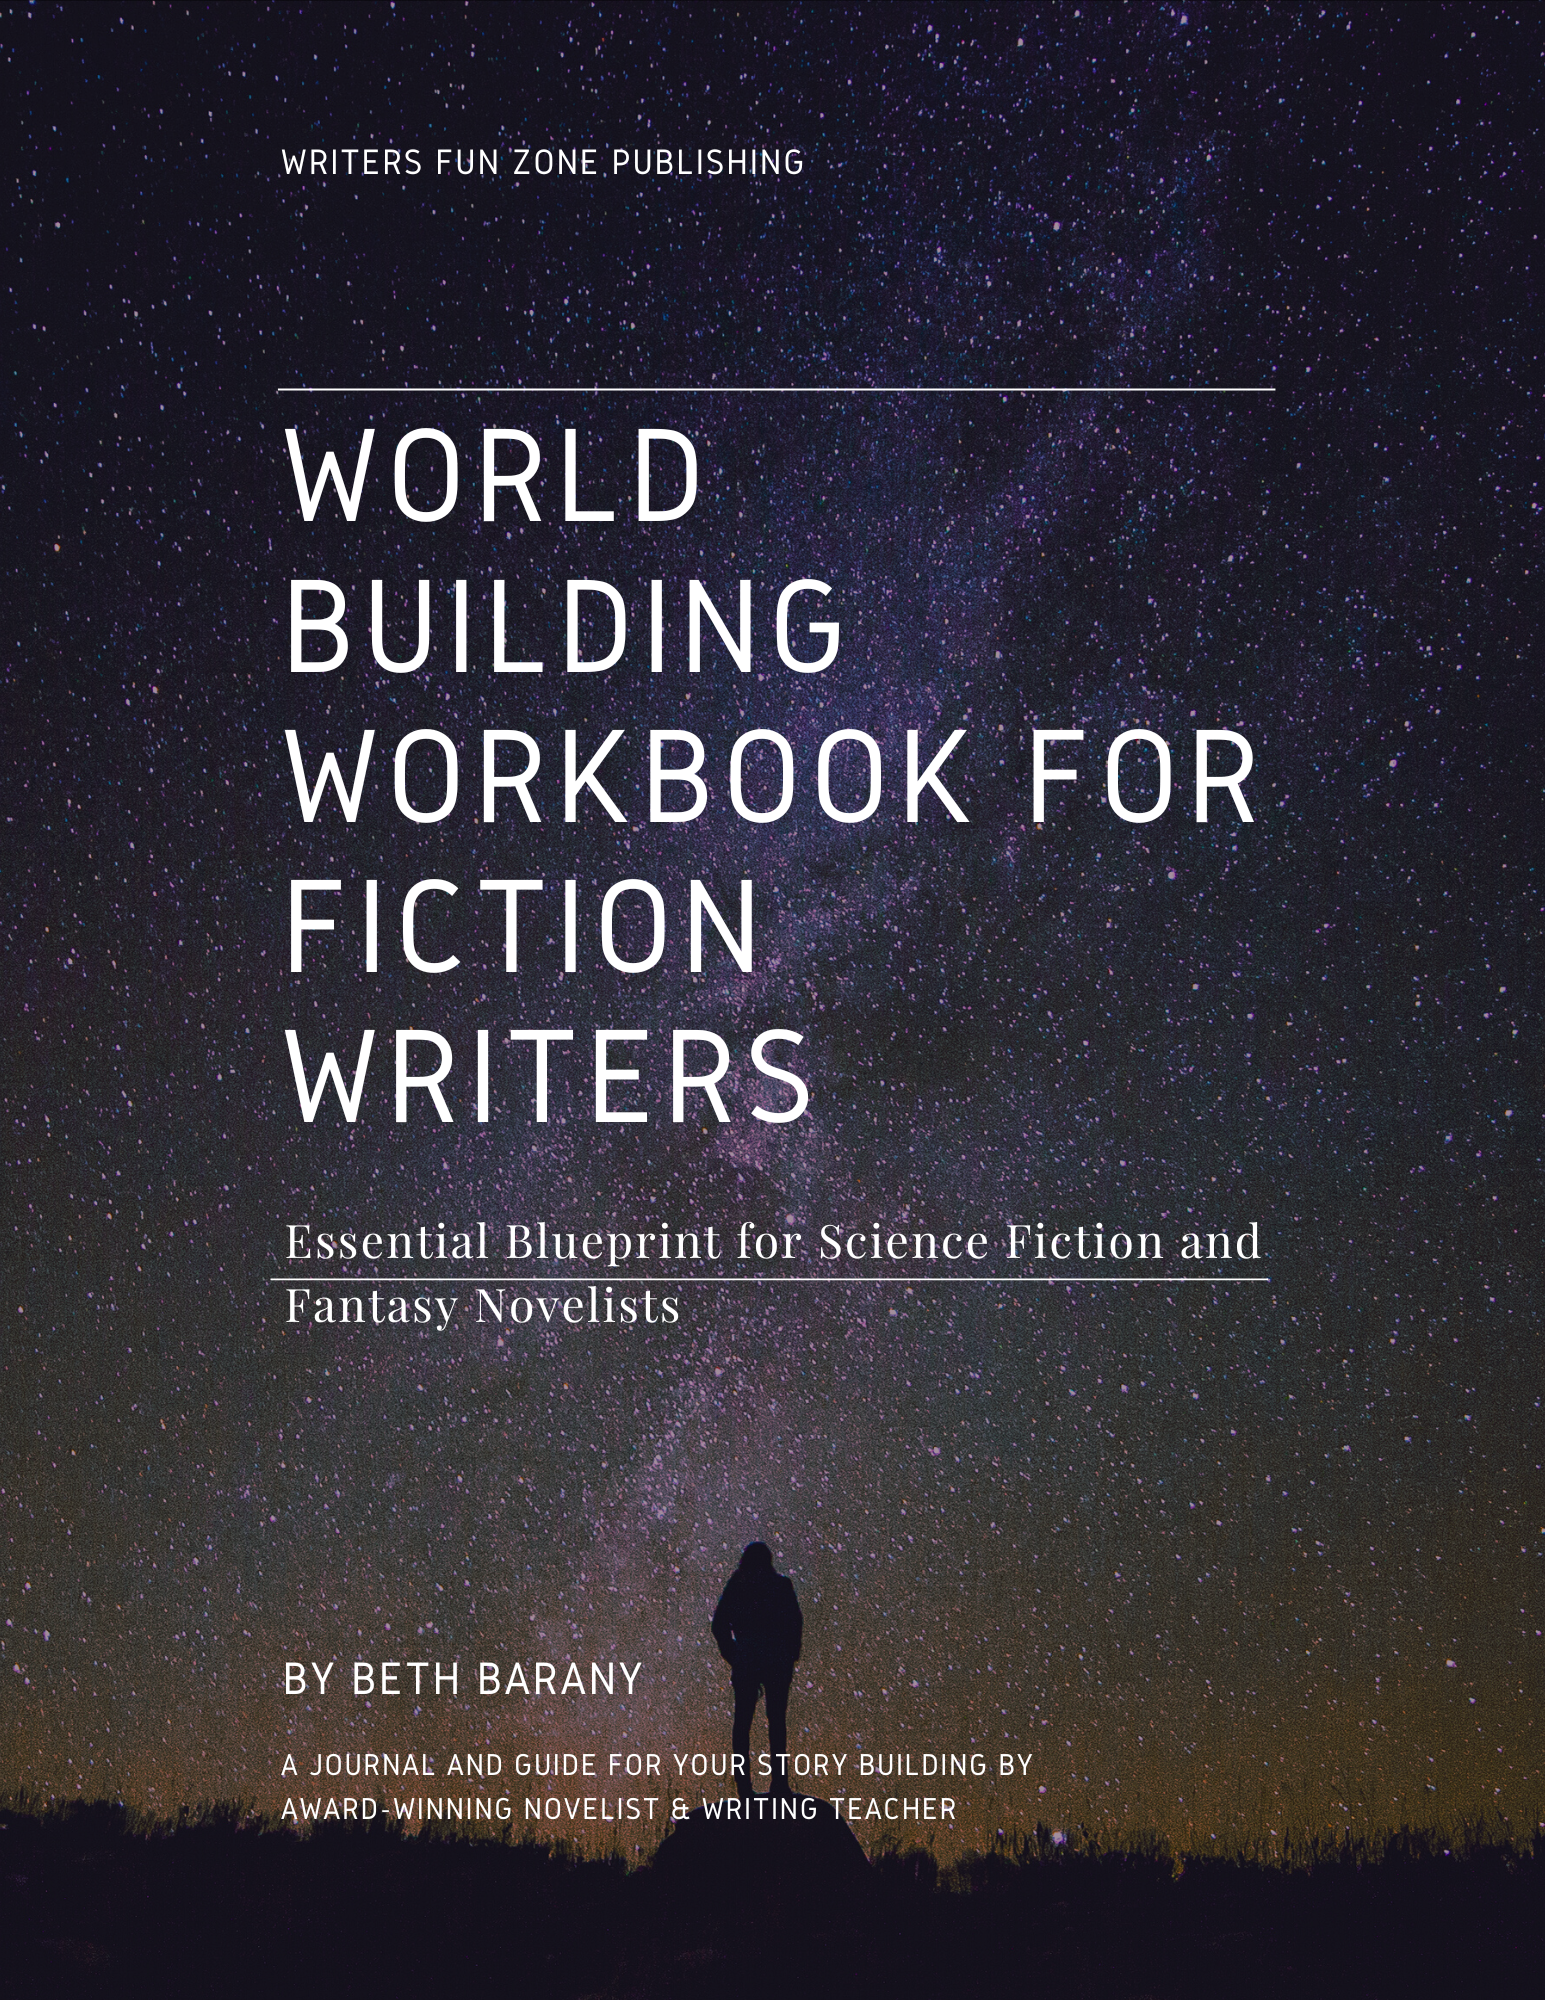 World Building Workbook for Fiction Writers